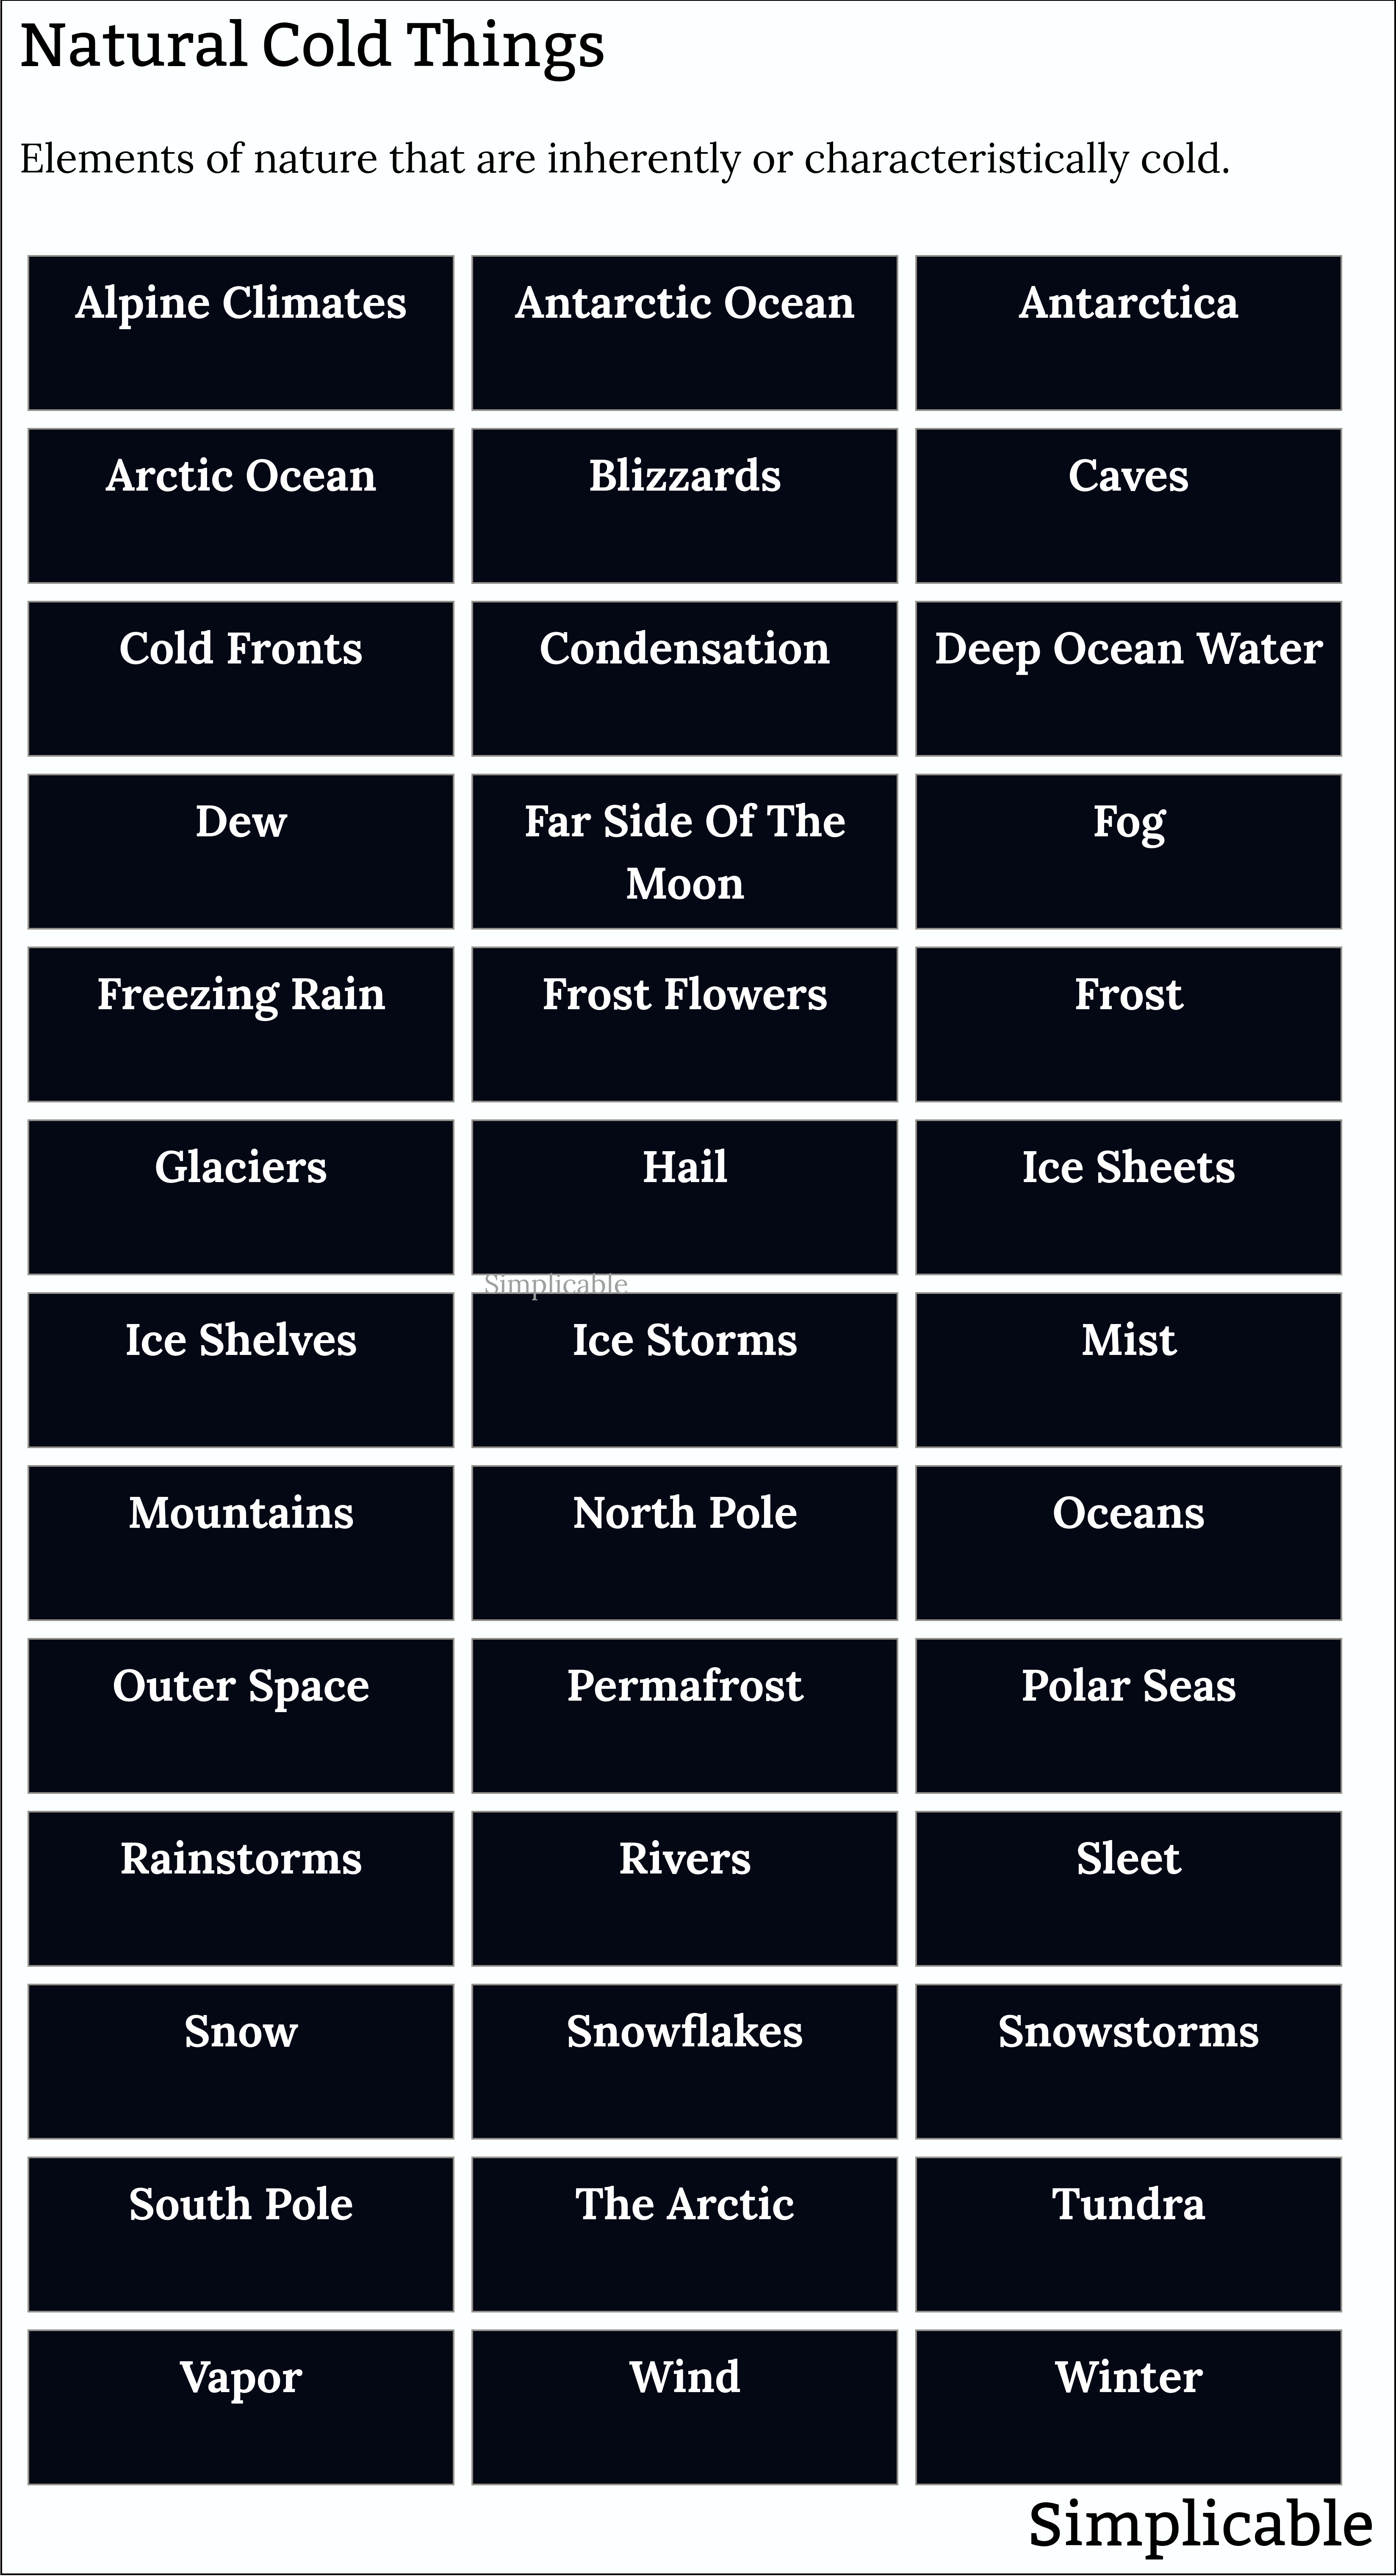 examples of natural cold things